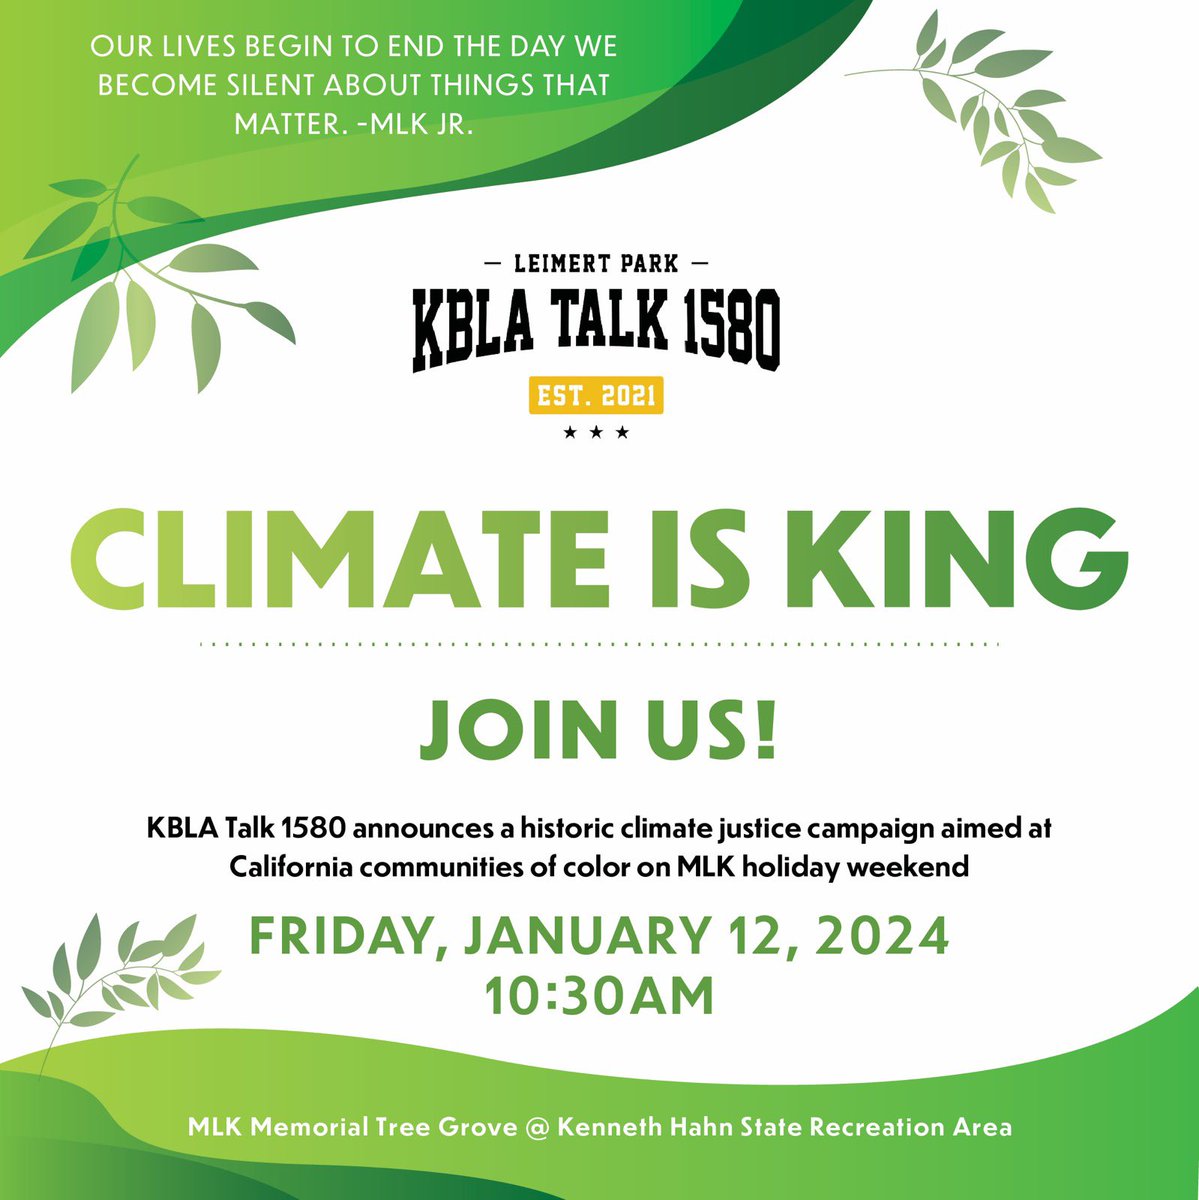 Join us on Friday, January 12, as we kick off this historic moment at Kenneth Hahn State Recreation Area! You don’t want to miss this big announcement. 

#KBLAClimateJusticeCampaign2024 #ClimateJustice